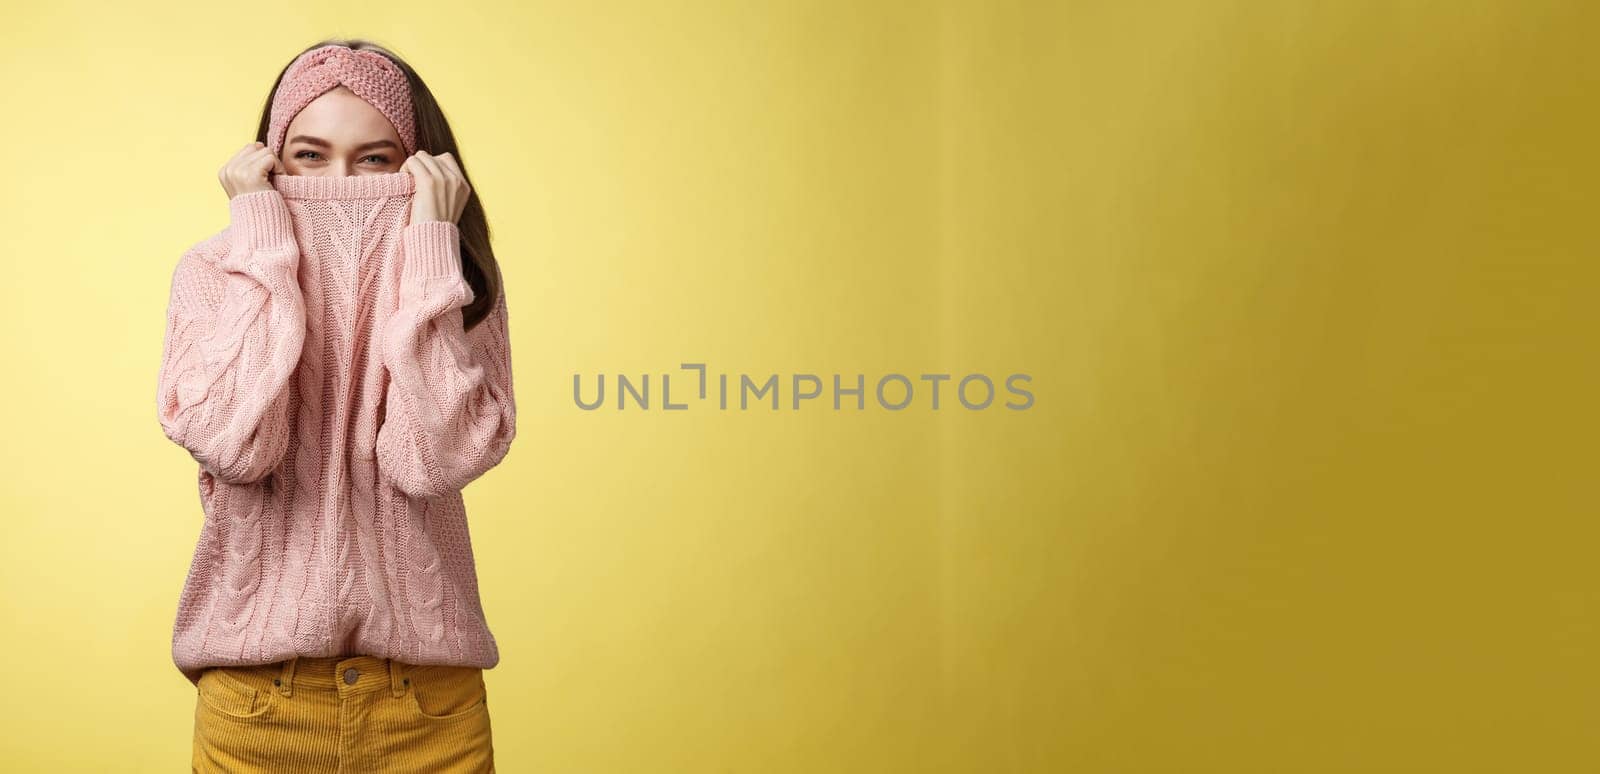 Cute playful young girl hiding in sweater peeking and squinting flirty over top of cloth pulling collar on nose, fooling around having fun happily, being in positive good mood, warming-up on cold day.